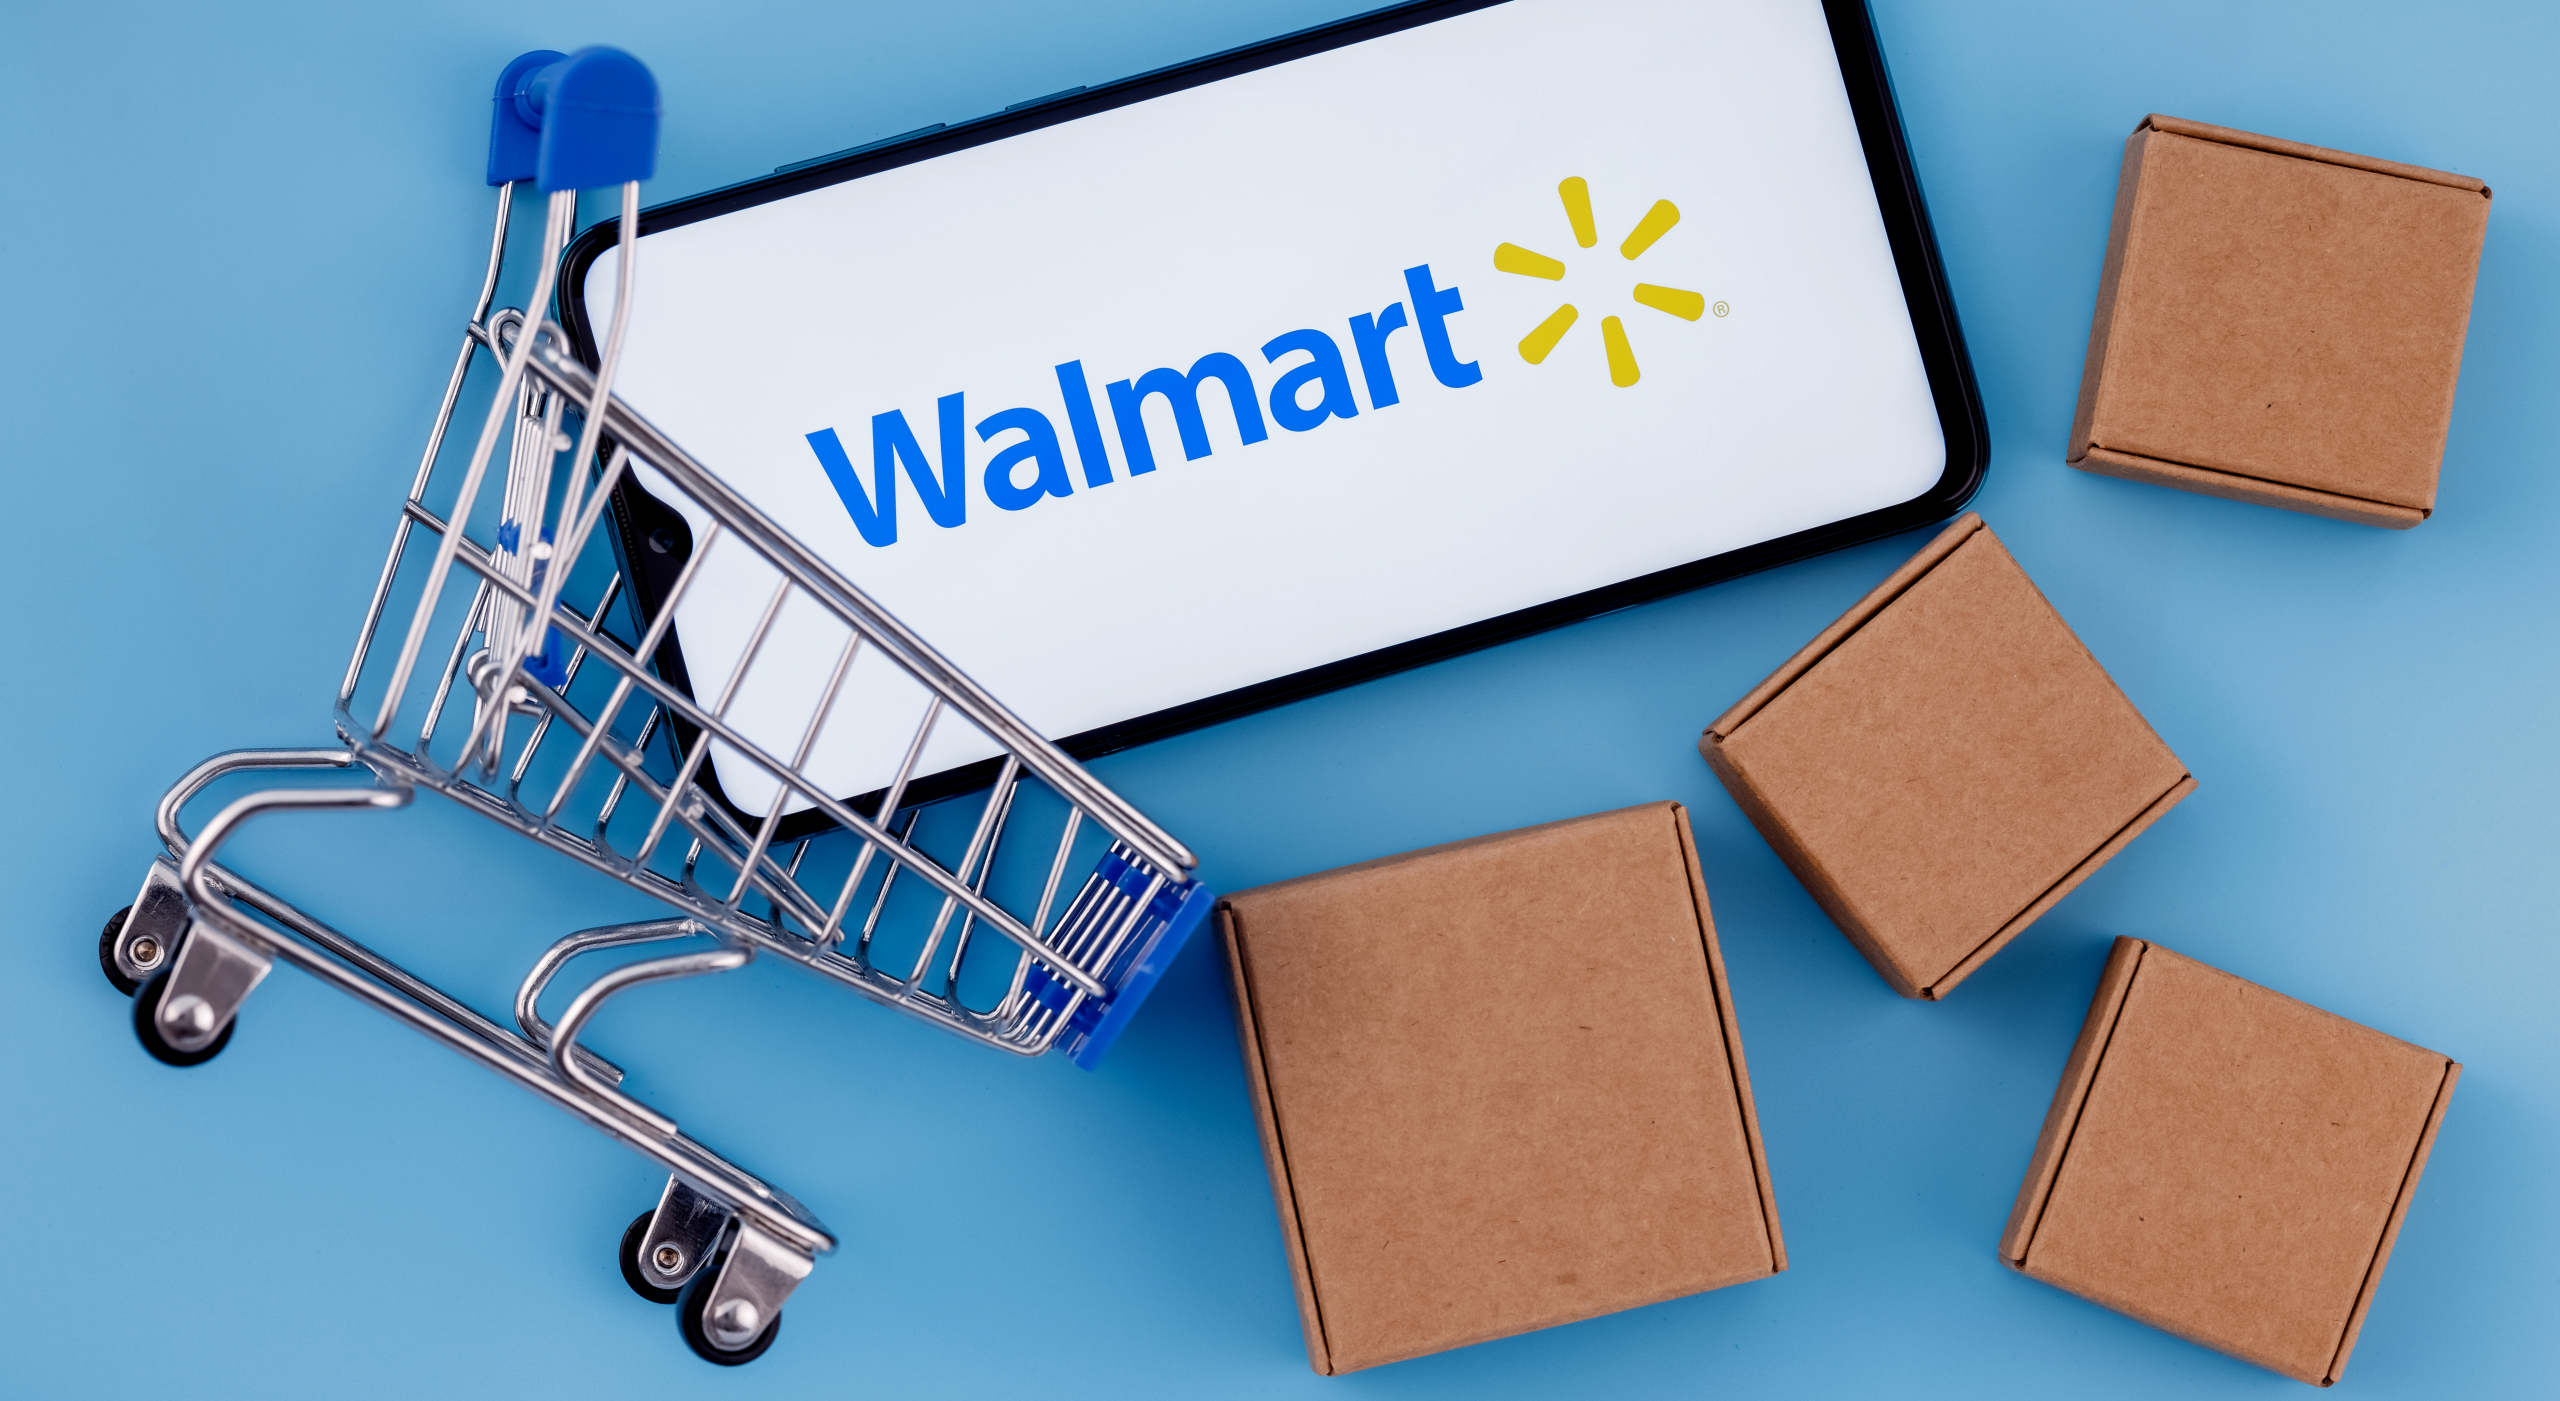 Walmart Dives Into Metaverse With Walmart Land & Universe of Play on Roblox  - Blockchain Council